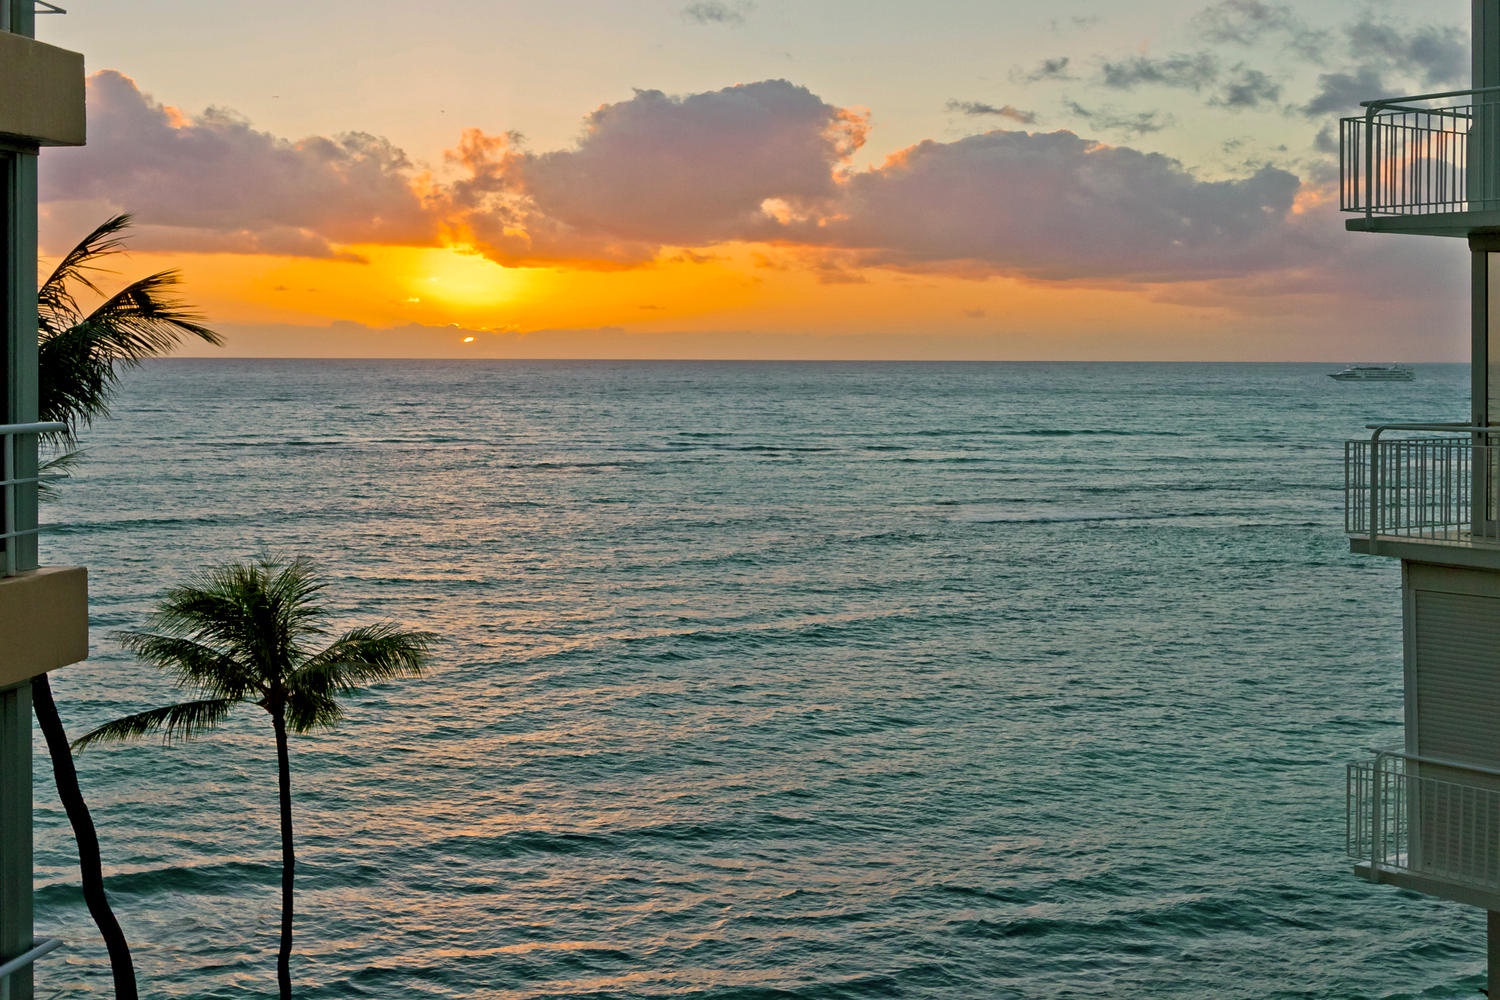 Honolulu Vacation Rentals, Executive Gold Coast Oceanfront Suite - Exceptional sunsets from the living room.